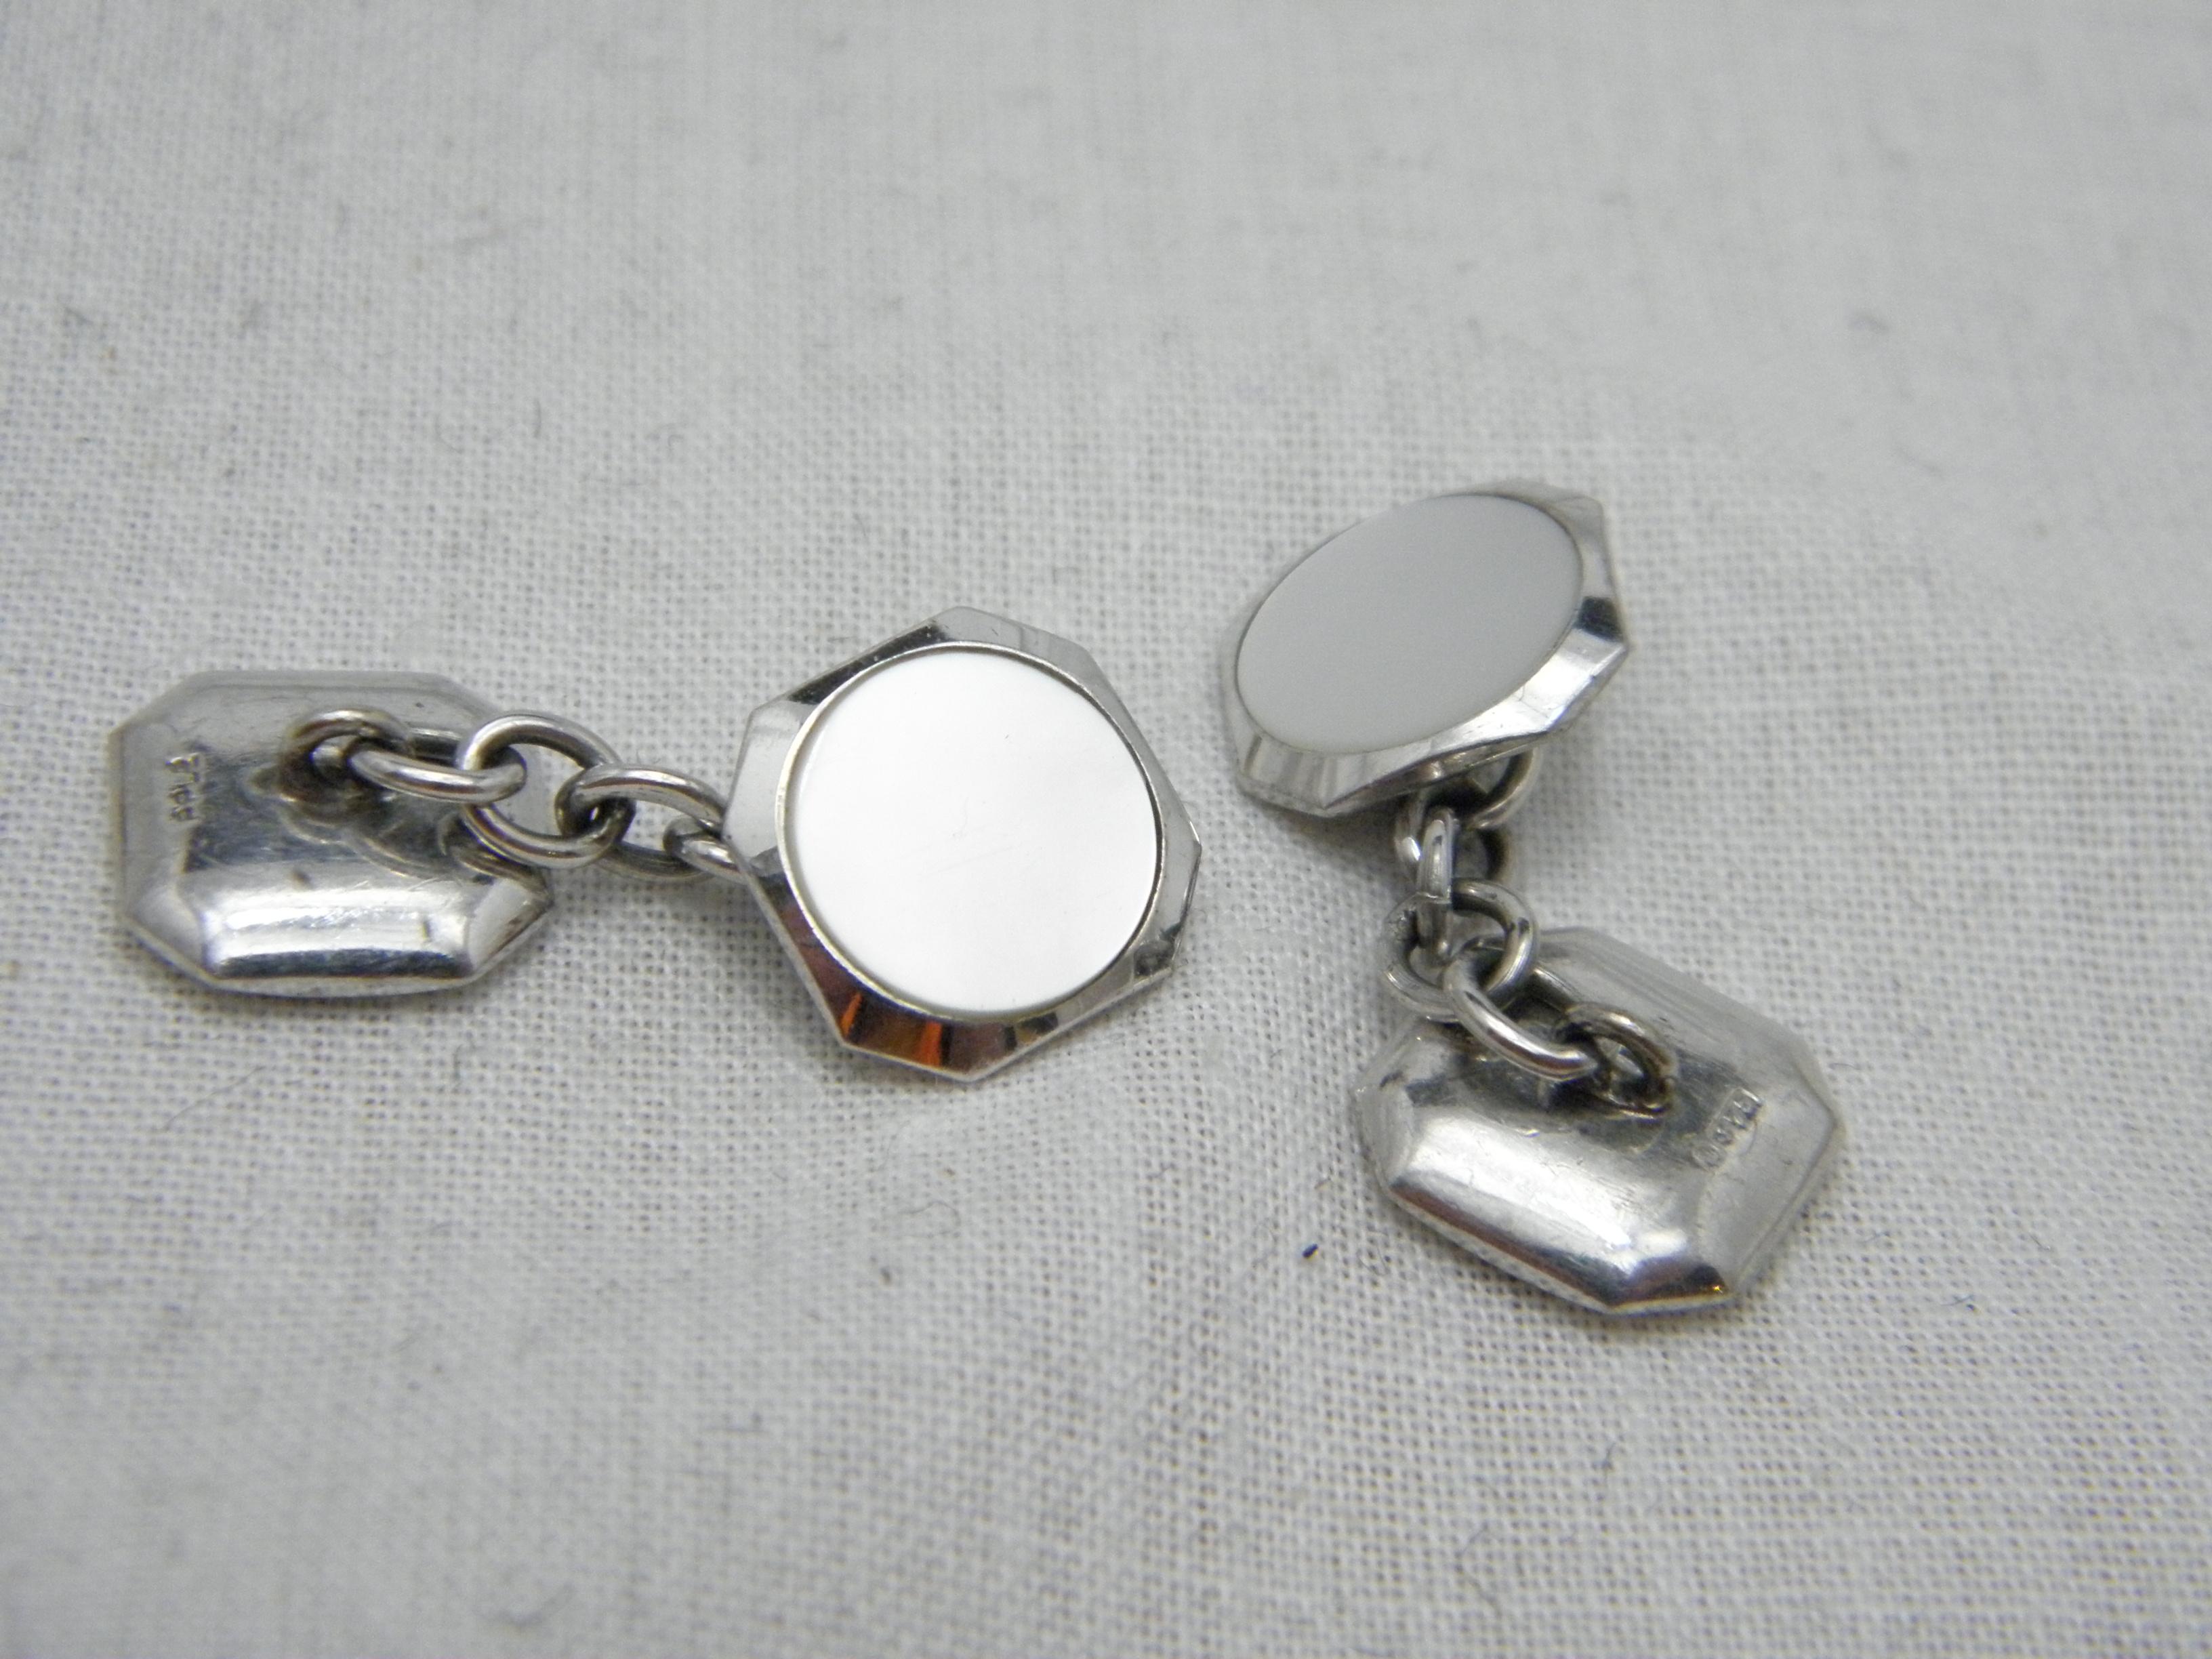 Vintage 9ct White Gold Cufflinks Collar Stud Set 375 Purity Heavy 8.2g Cuff Link In Excellent Condition For Sale In Camelford, GB